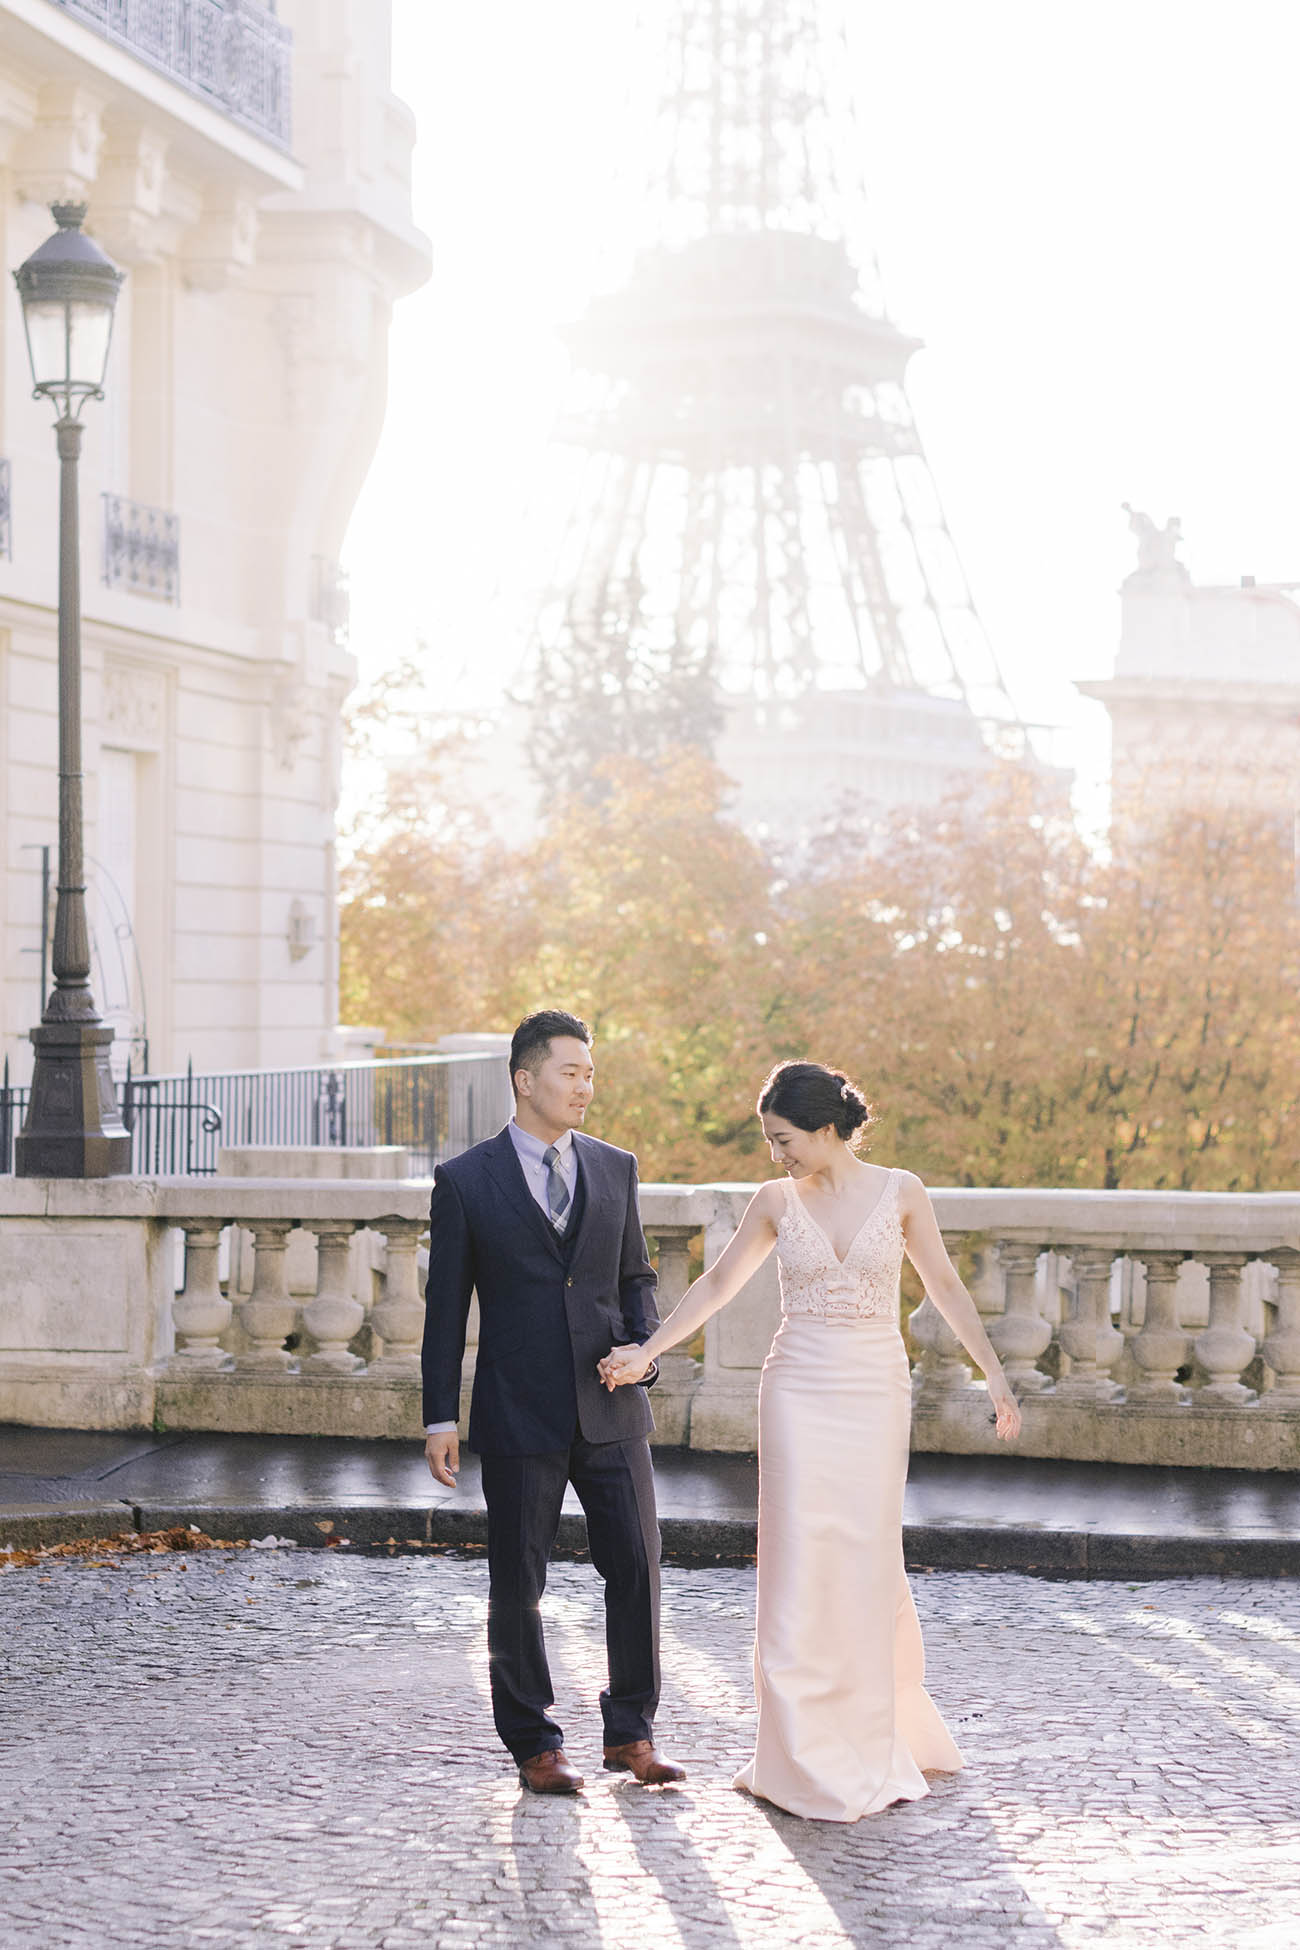 Bride excited for her pre-wedding photography session in Paris